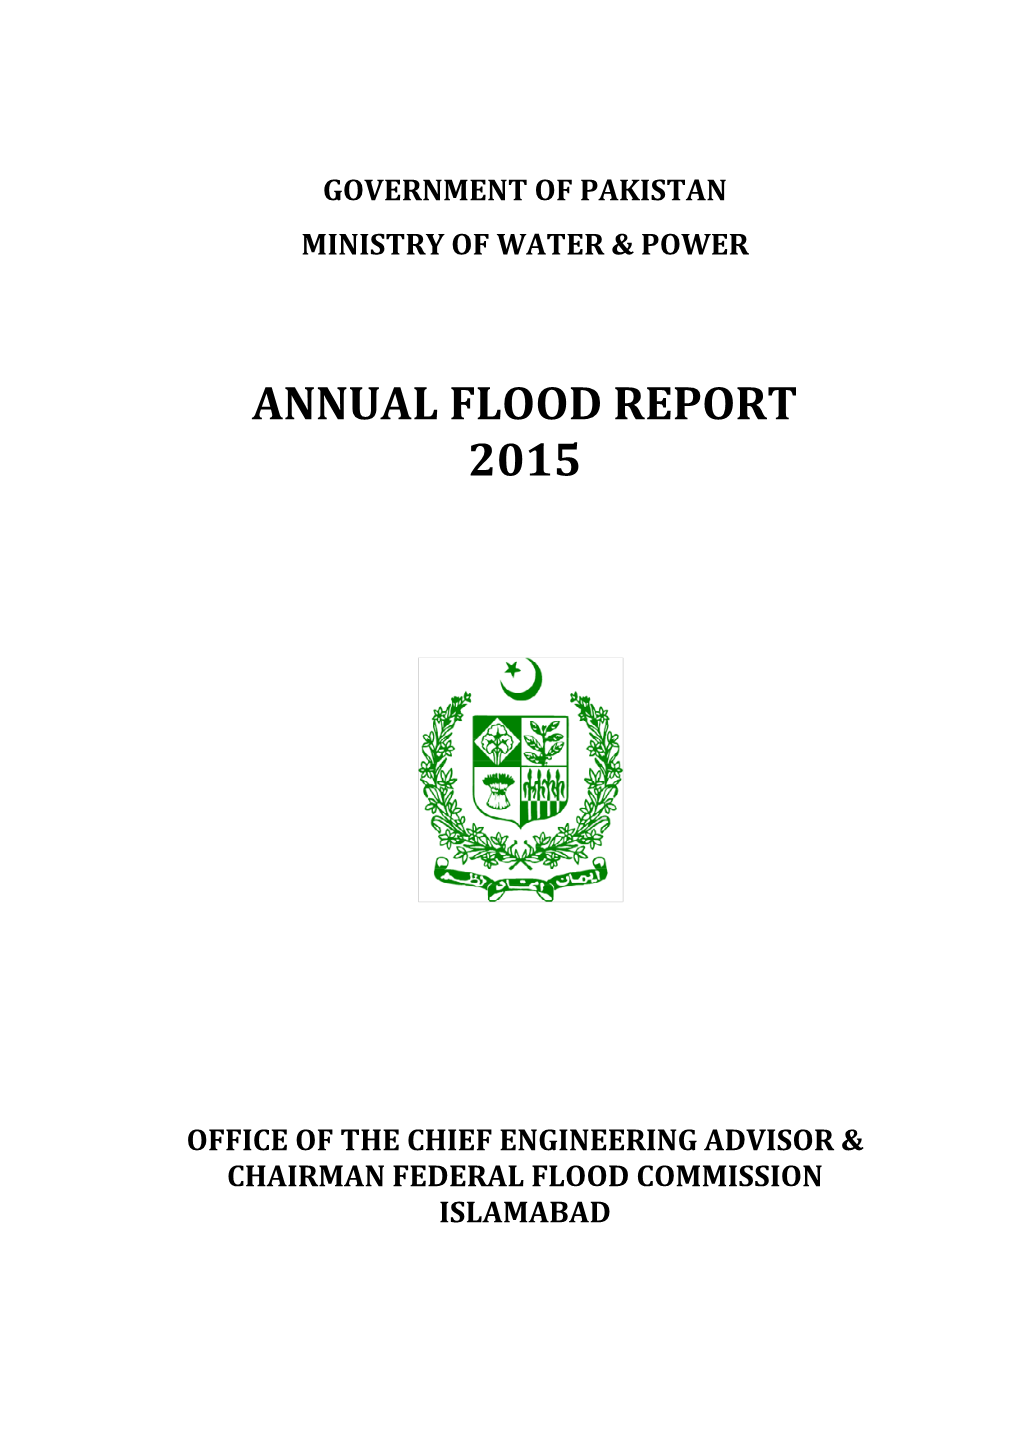 2015 Annual Flood Report Of